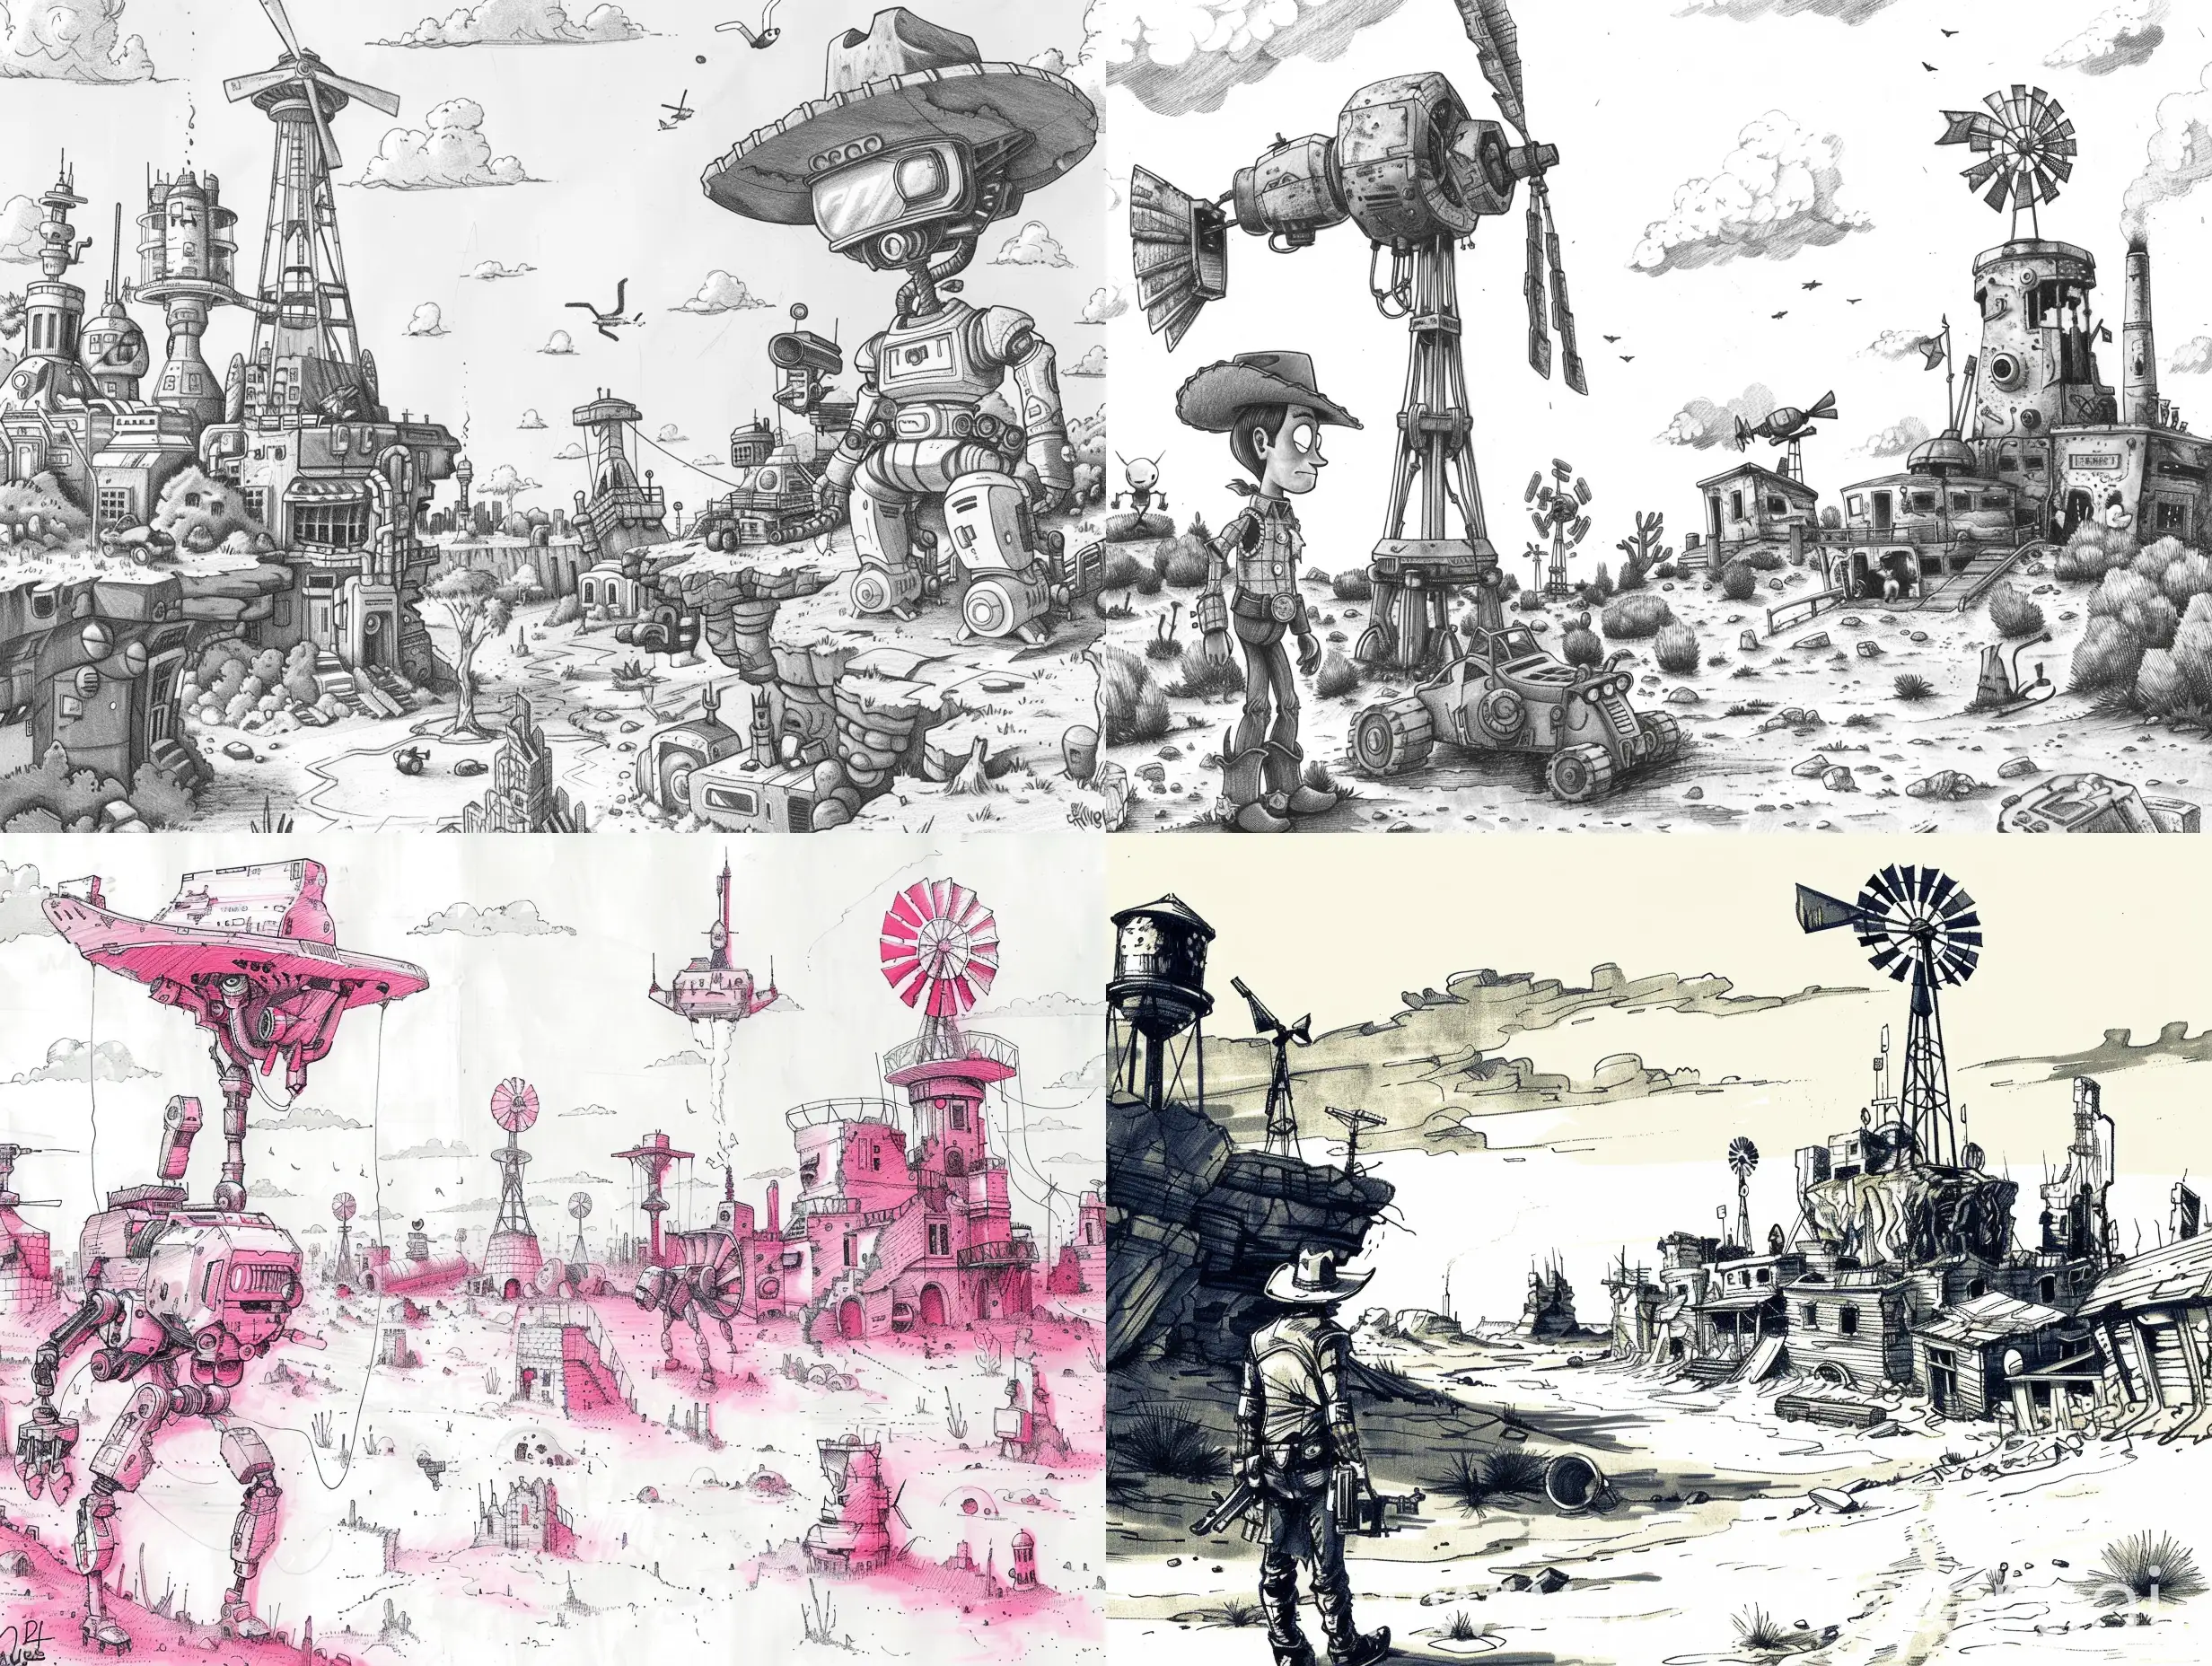 Futuristic-Texas-Windmill-Landscape-with-Cowboy-and-Robot-Horse-Battling-Cyber-Robots